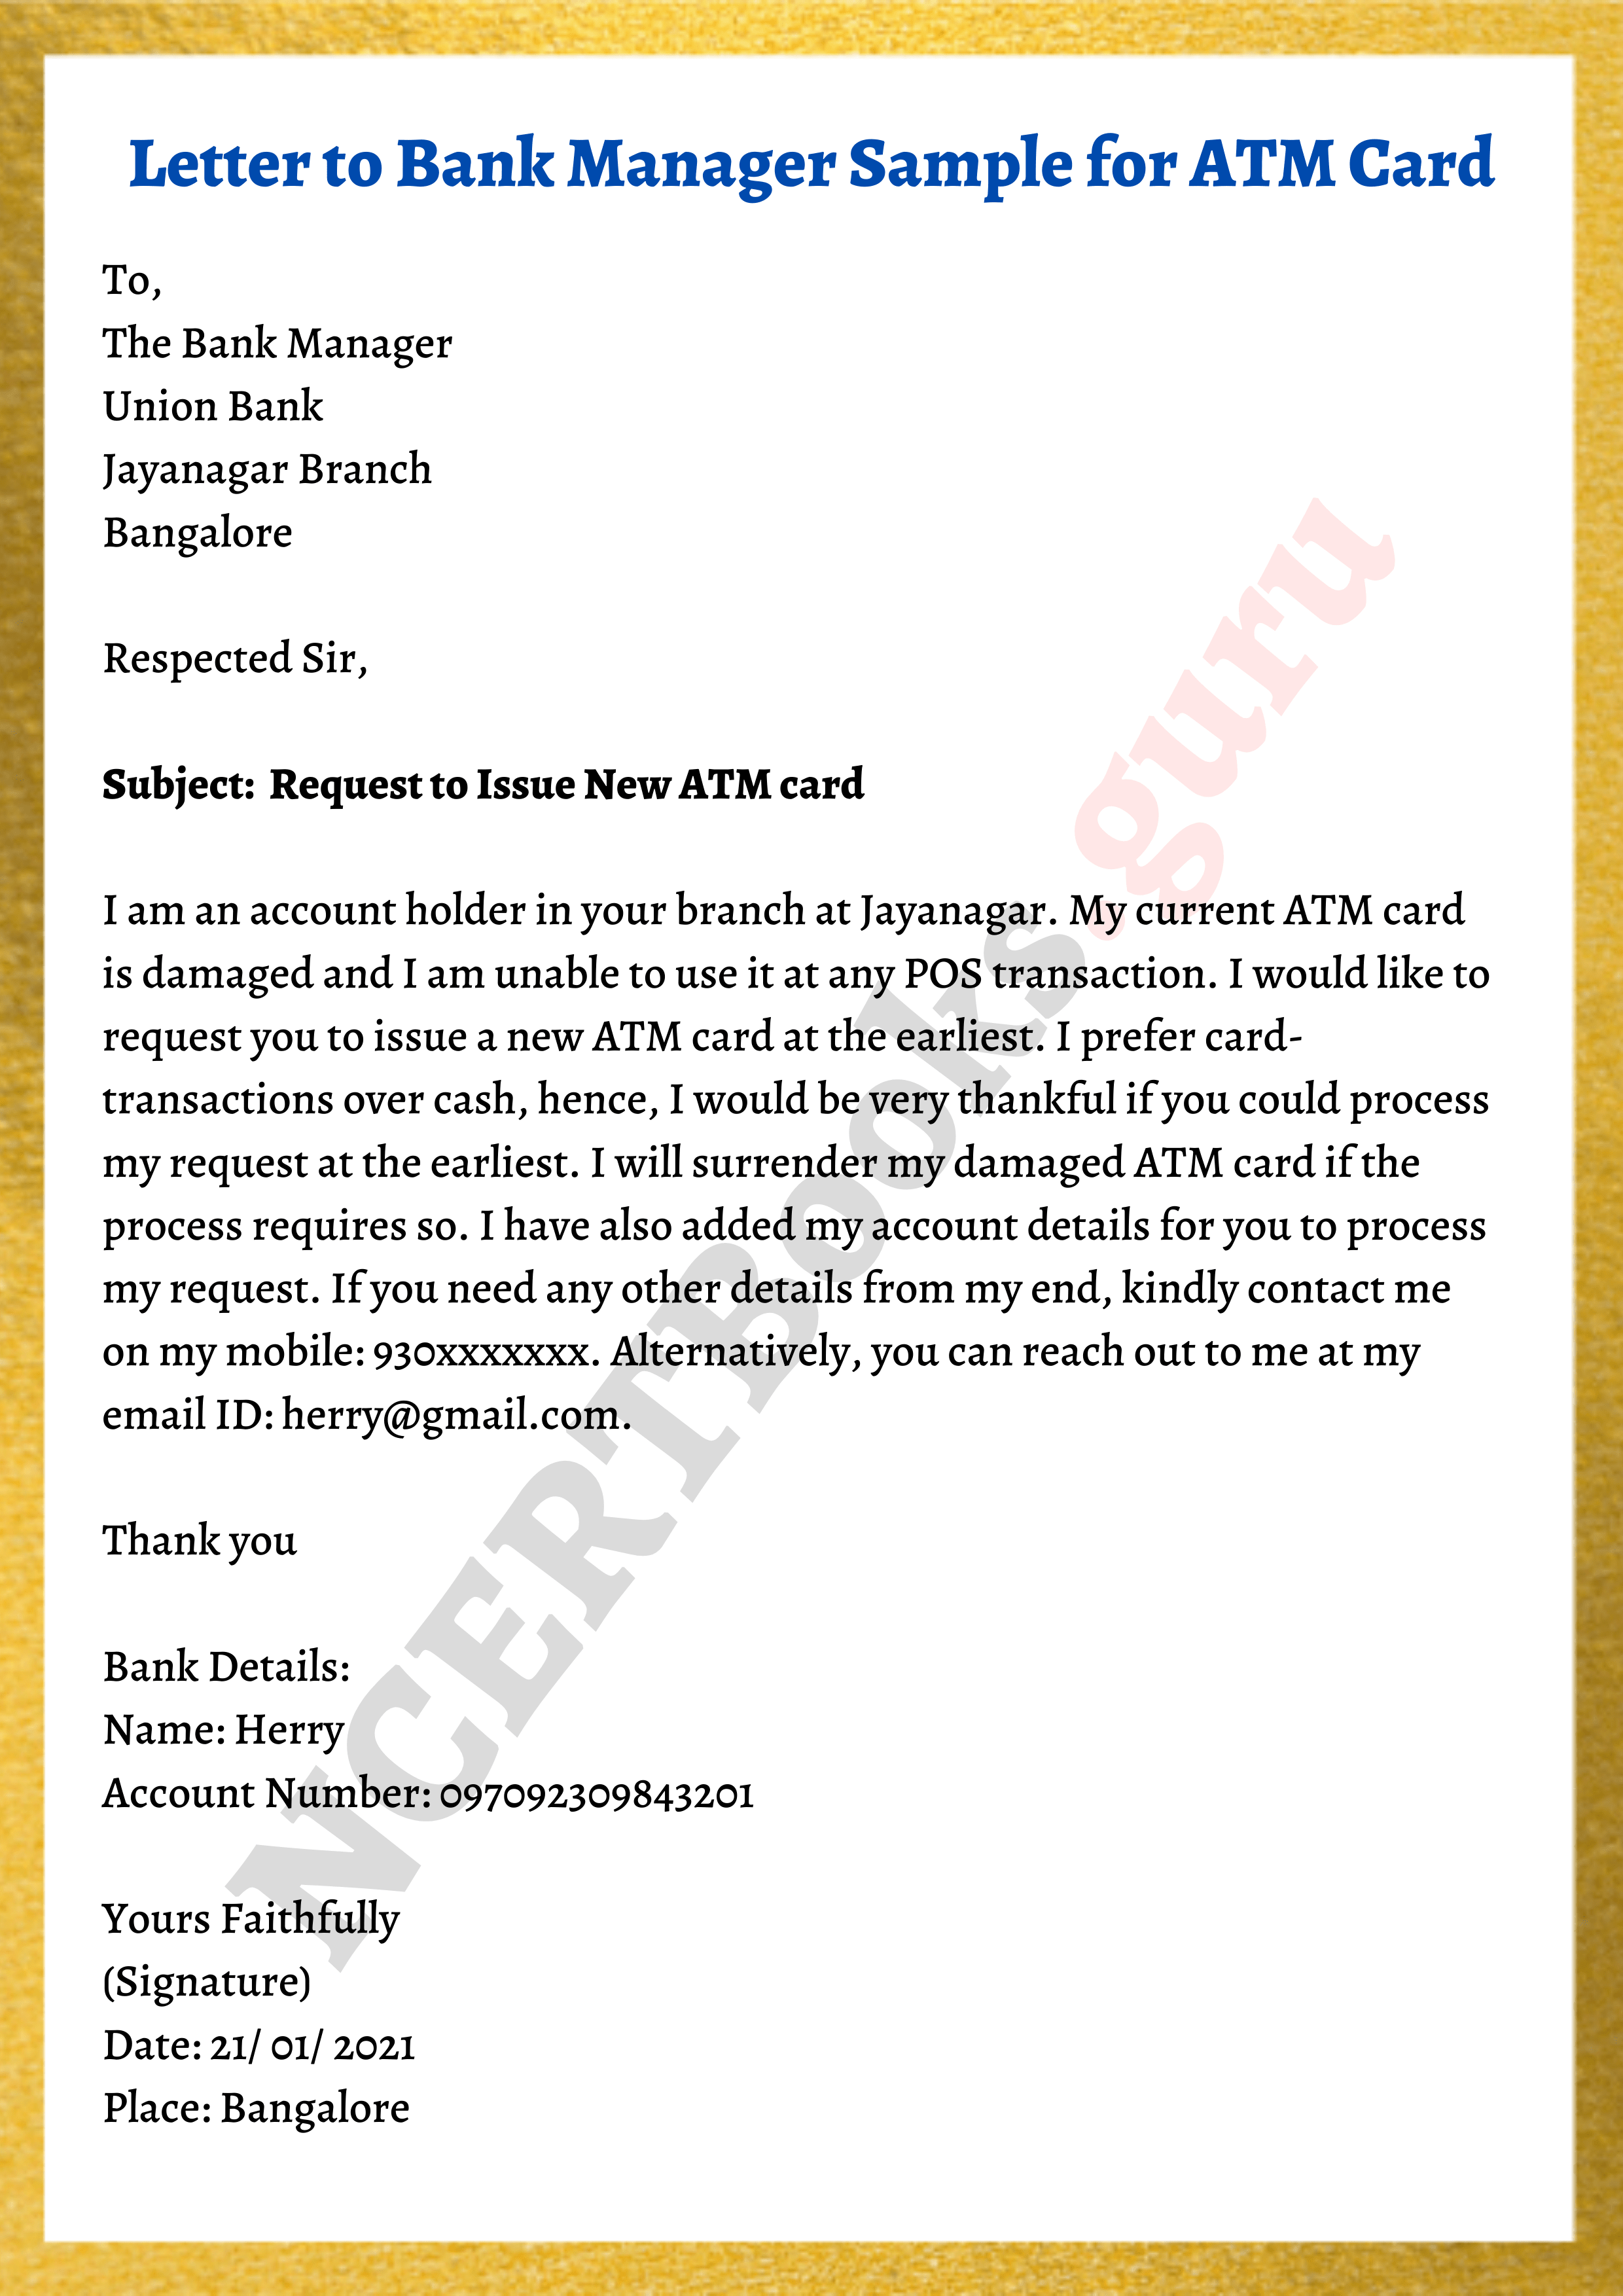 how to write a application letter to bank manager for change of address